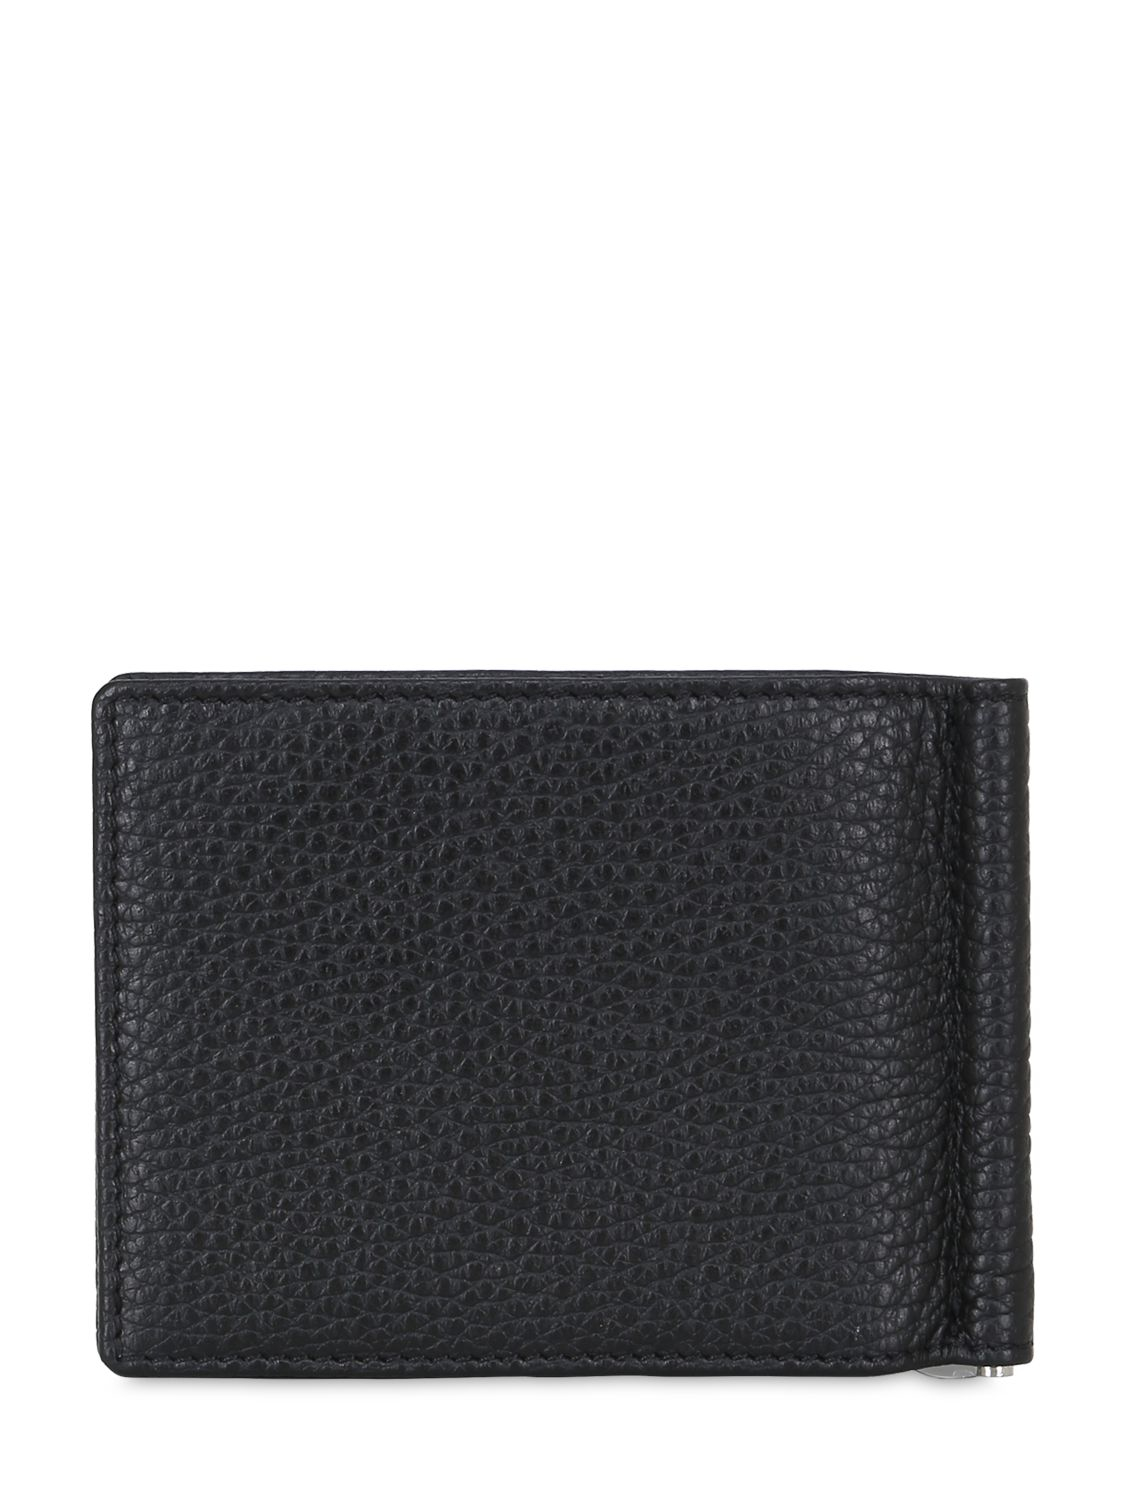 Lyst - Vivienne Westwood Milano Leather 33355 Billfold Wallet With Coin Holder Black in Black ...